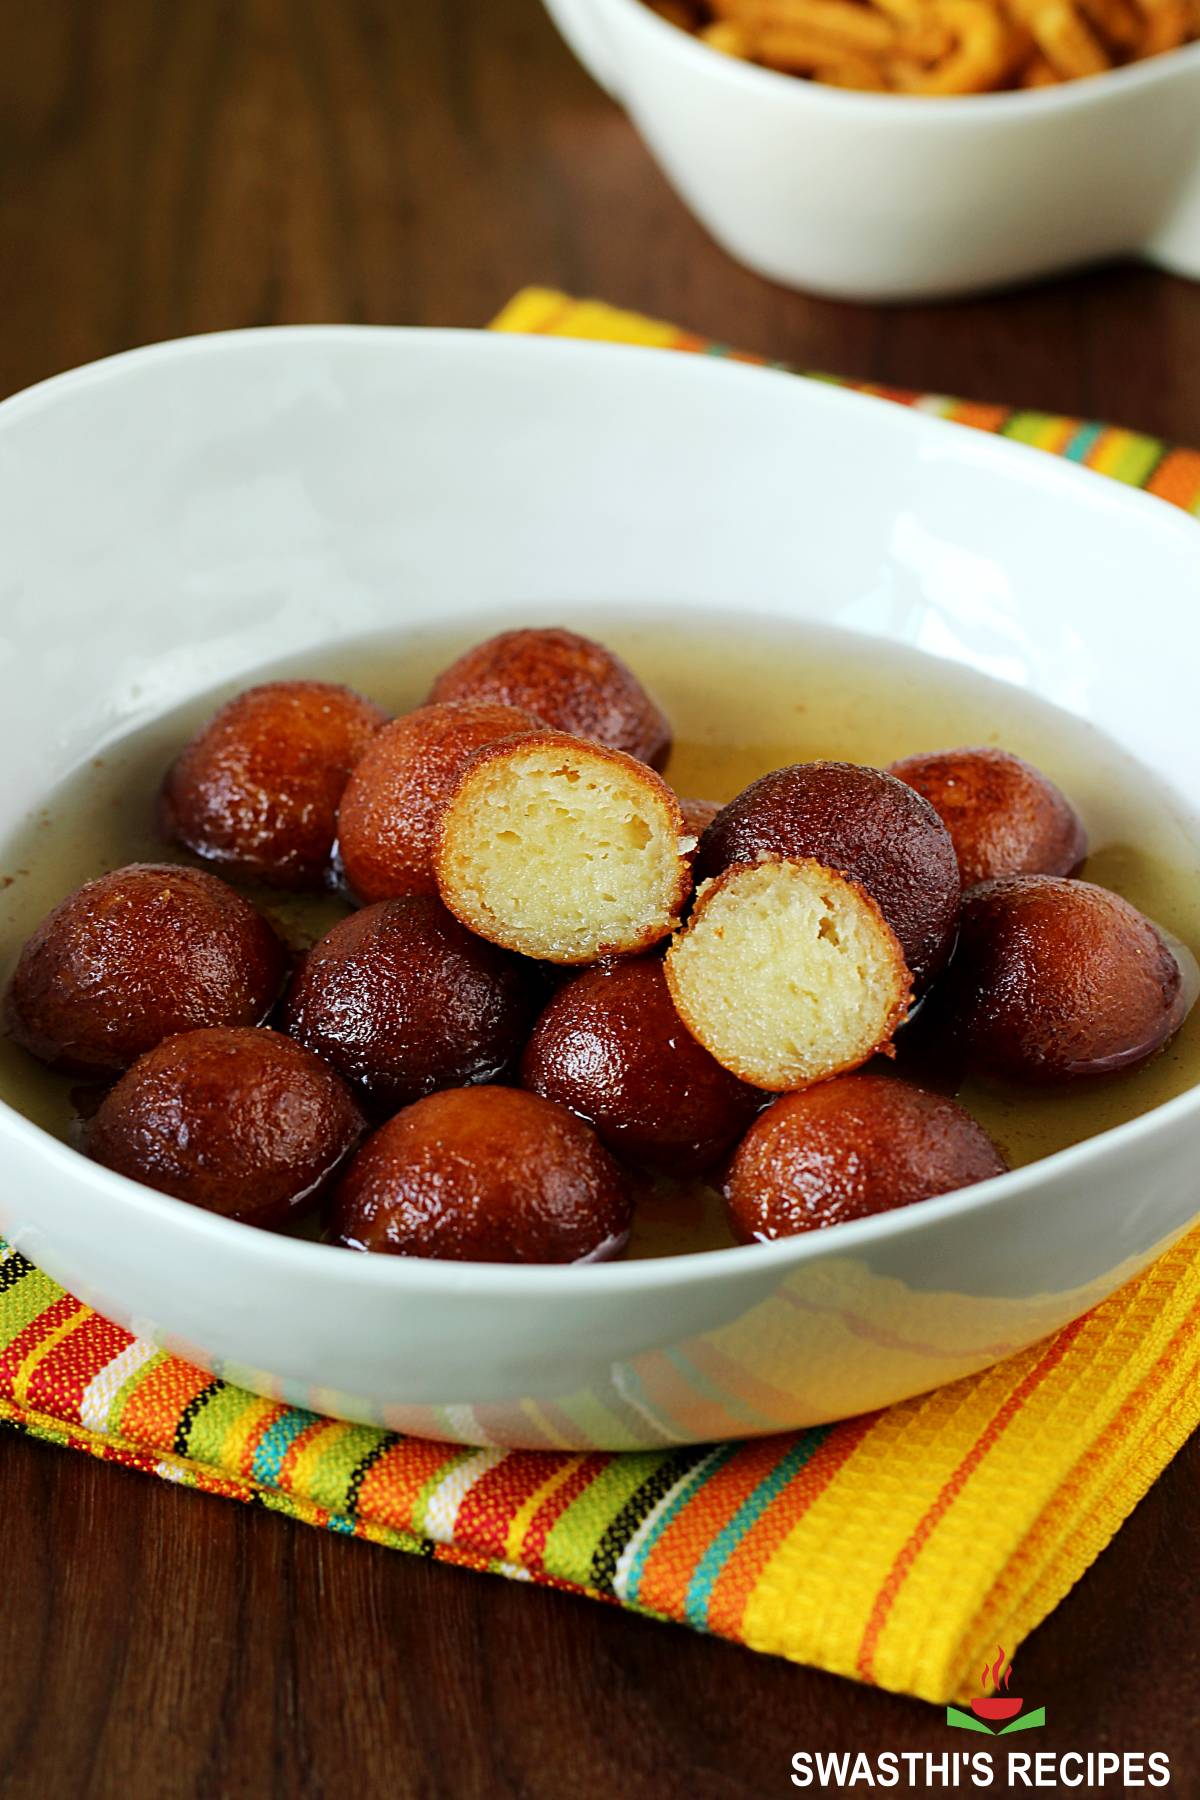 Gulab jamun with khoya served in a white bowl